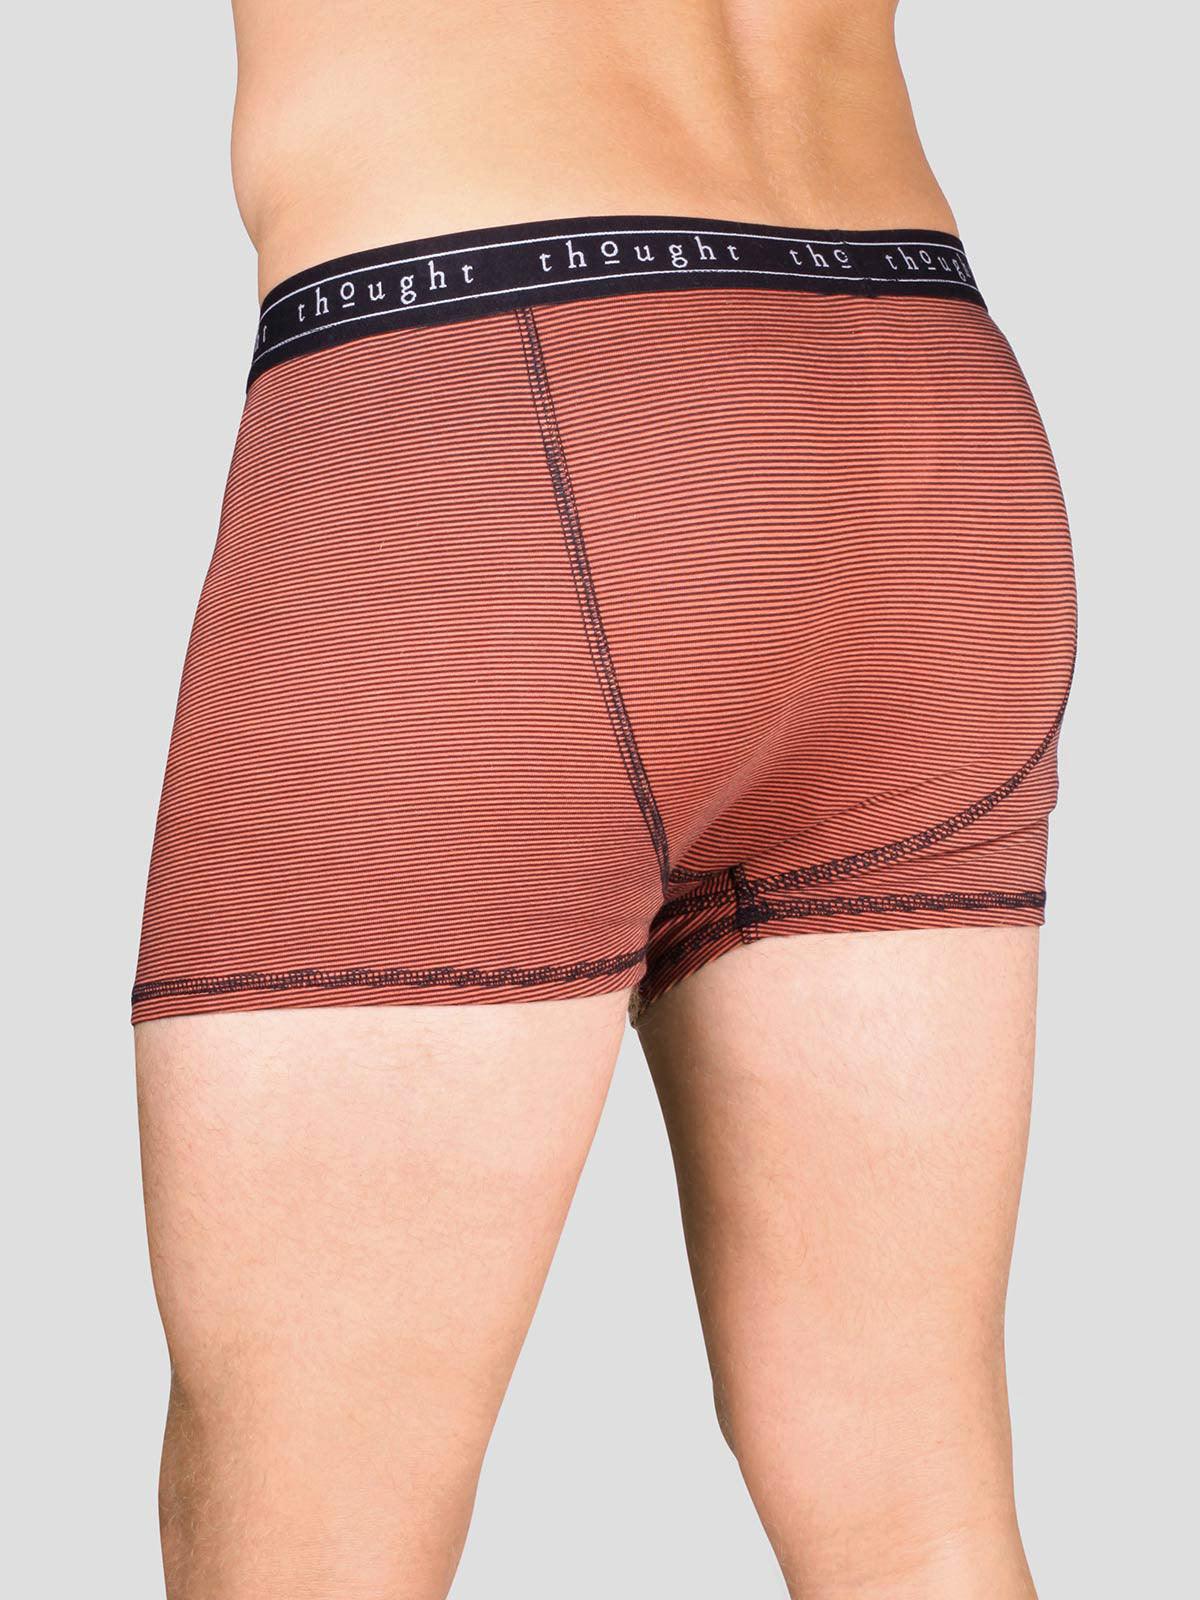 Michael Striped Bamboo Jersey Boxers - Thought Clothing UK